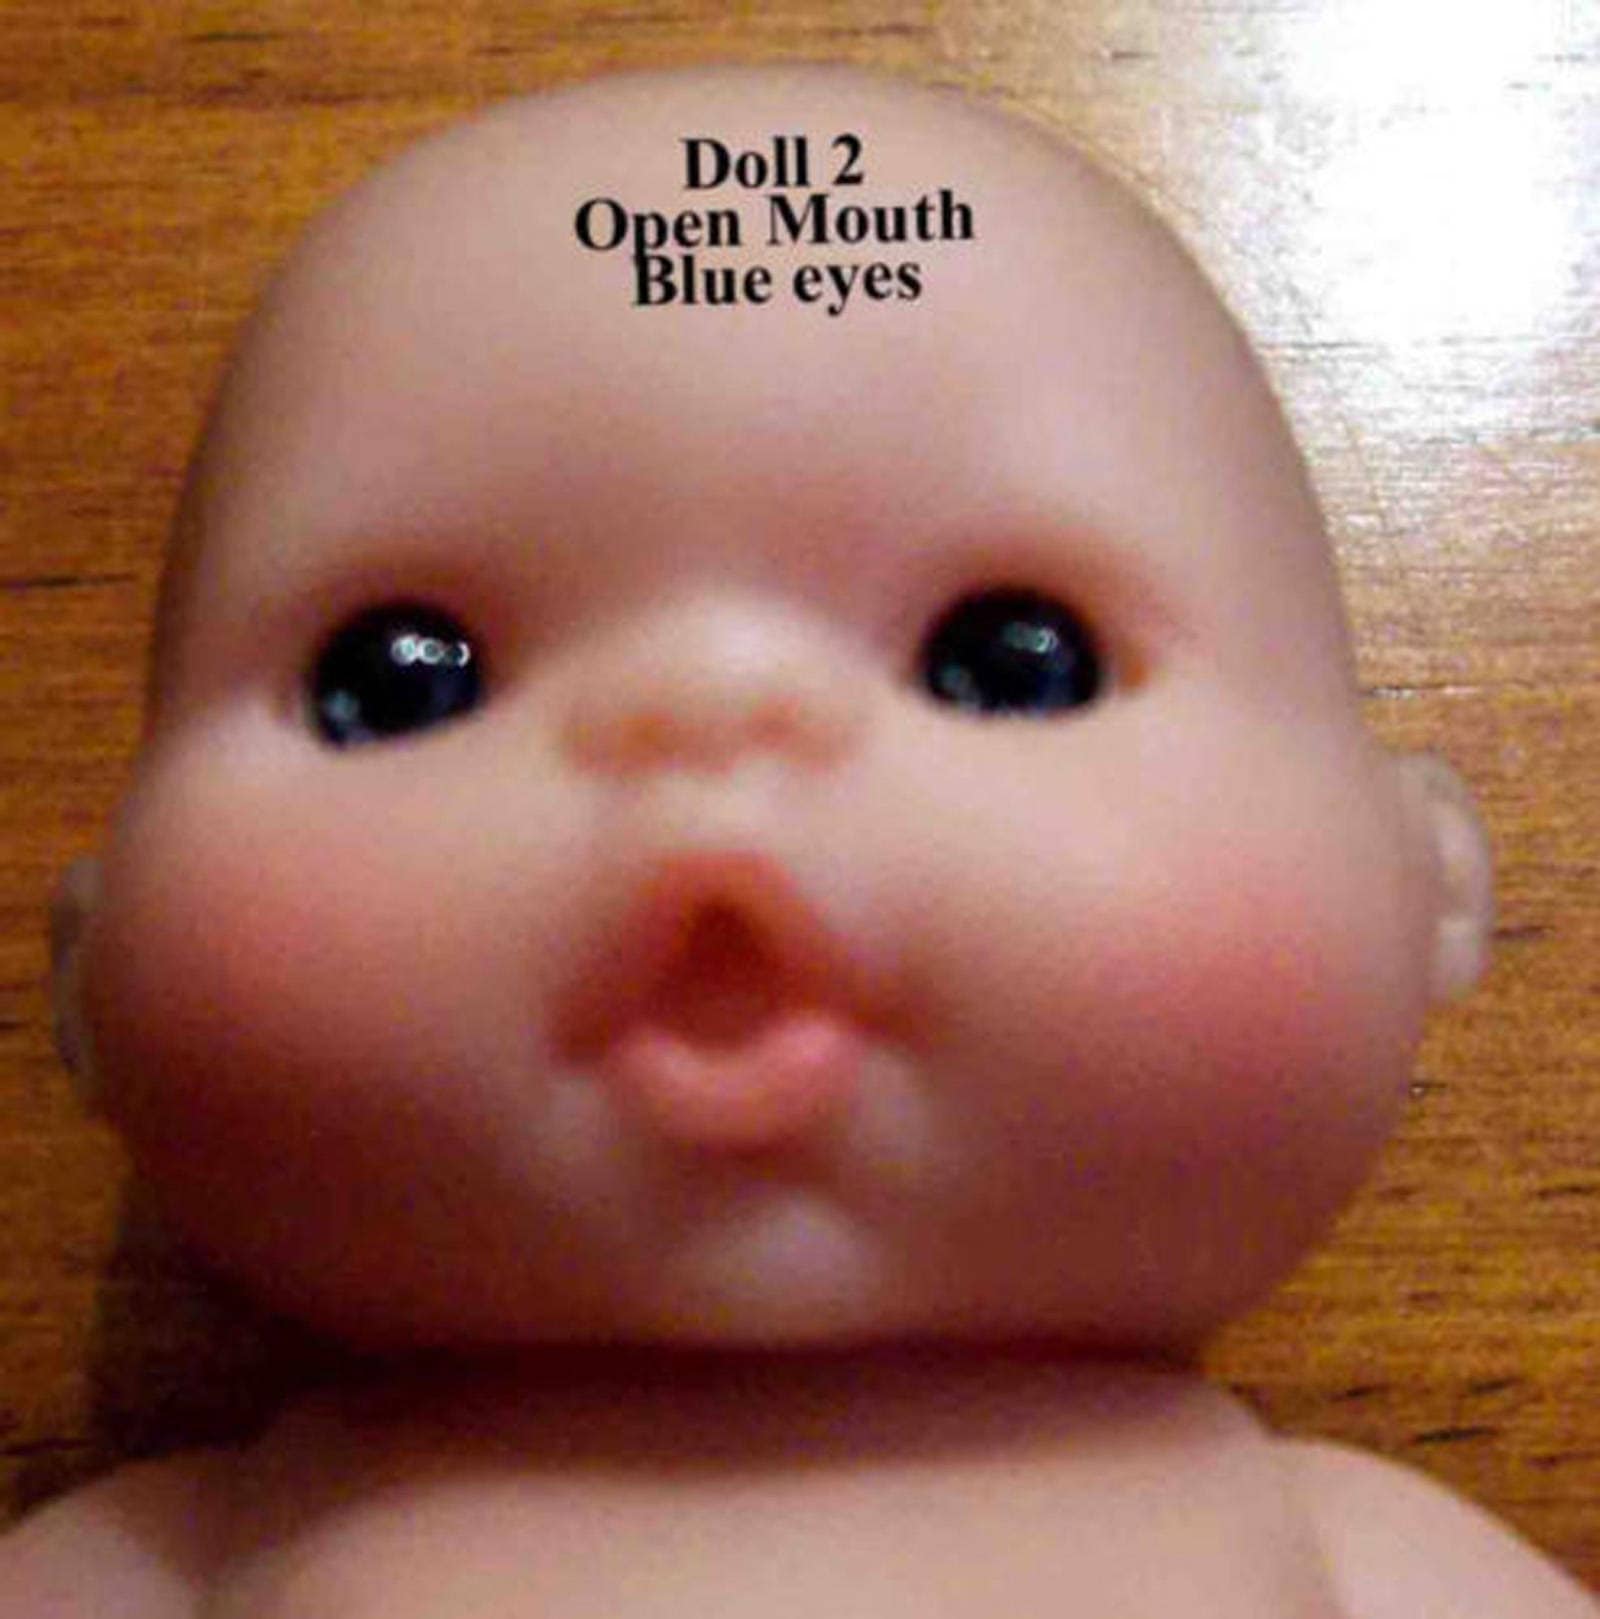 5 NEW Berenguer Lots to Love 5" Inch Baby Dolls Itty Bitty Craft Sale Adorable! 